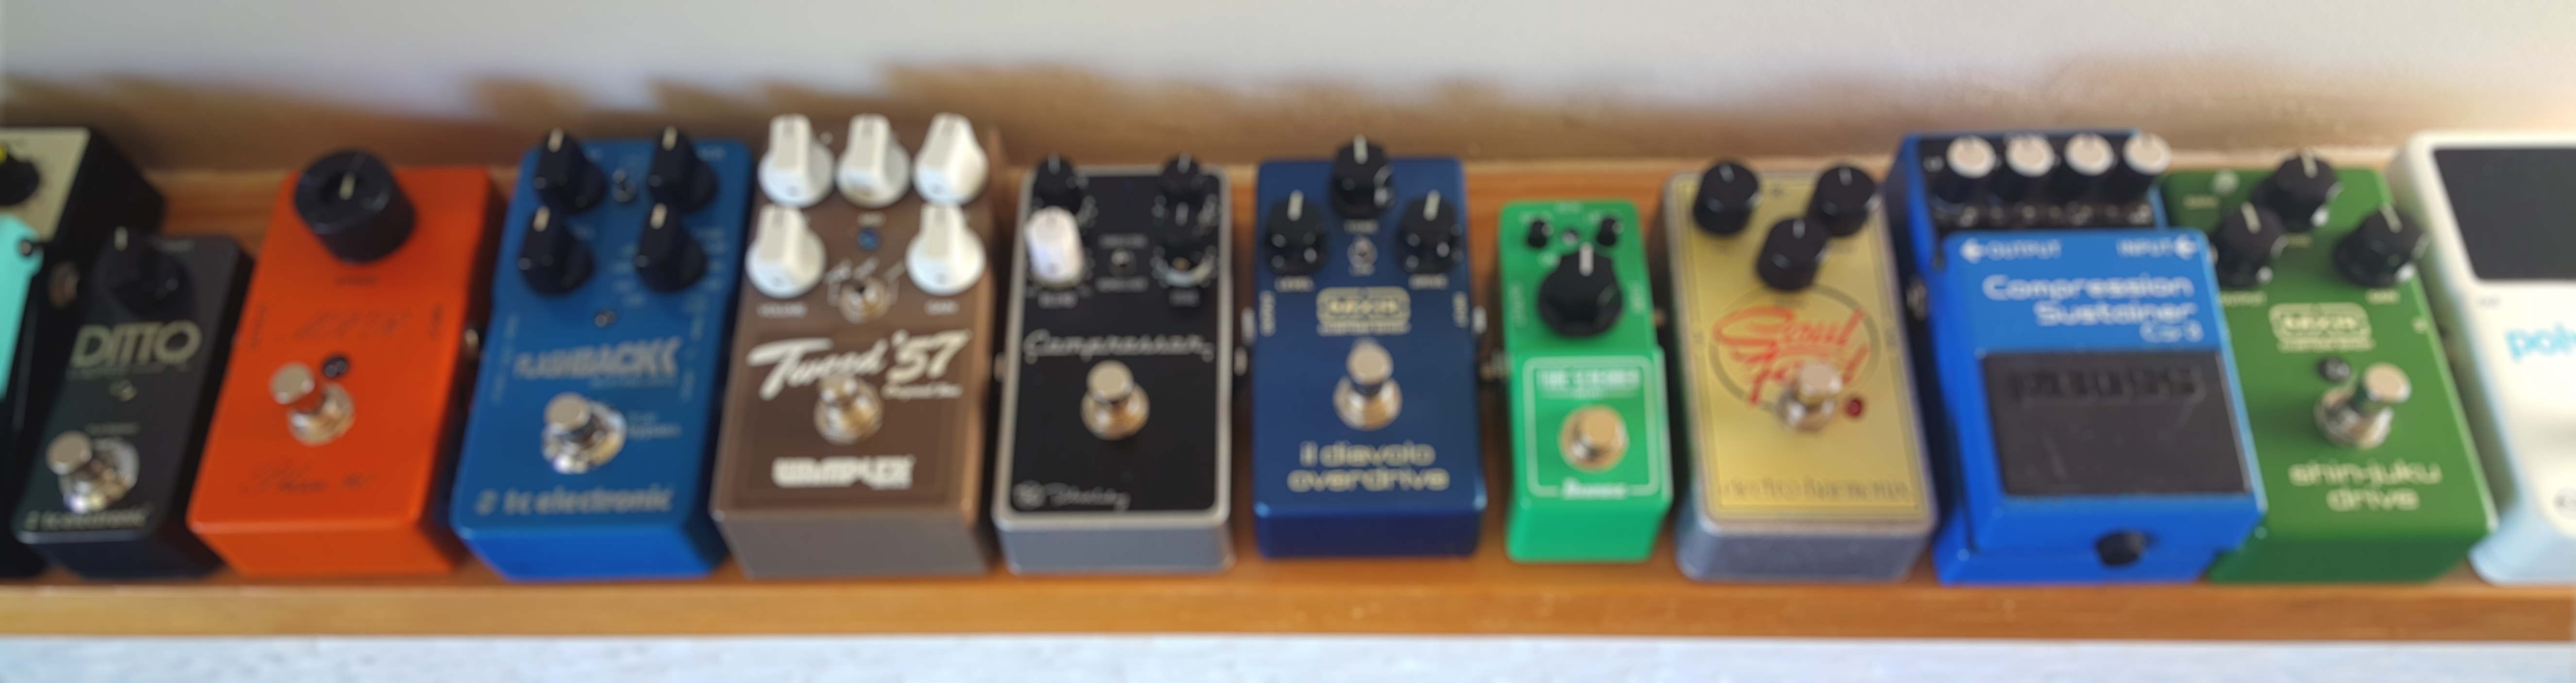 r77-lineofpedals.jpg